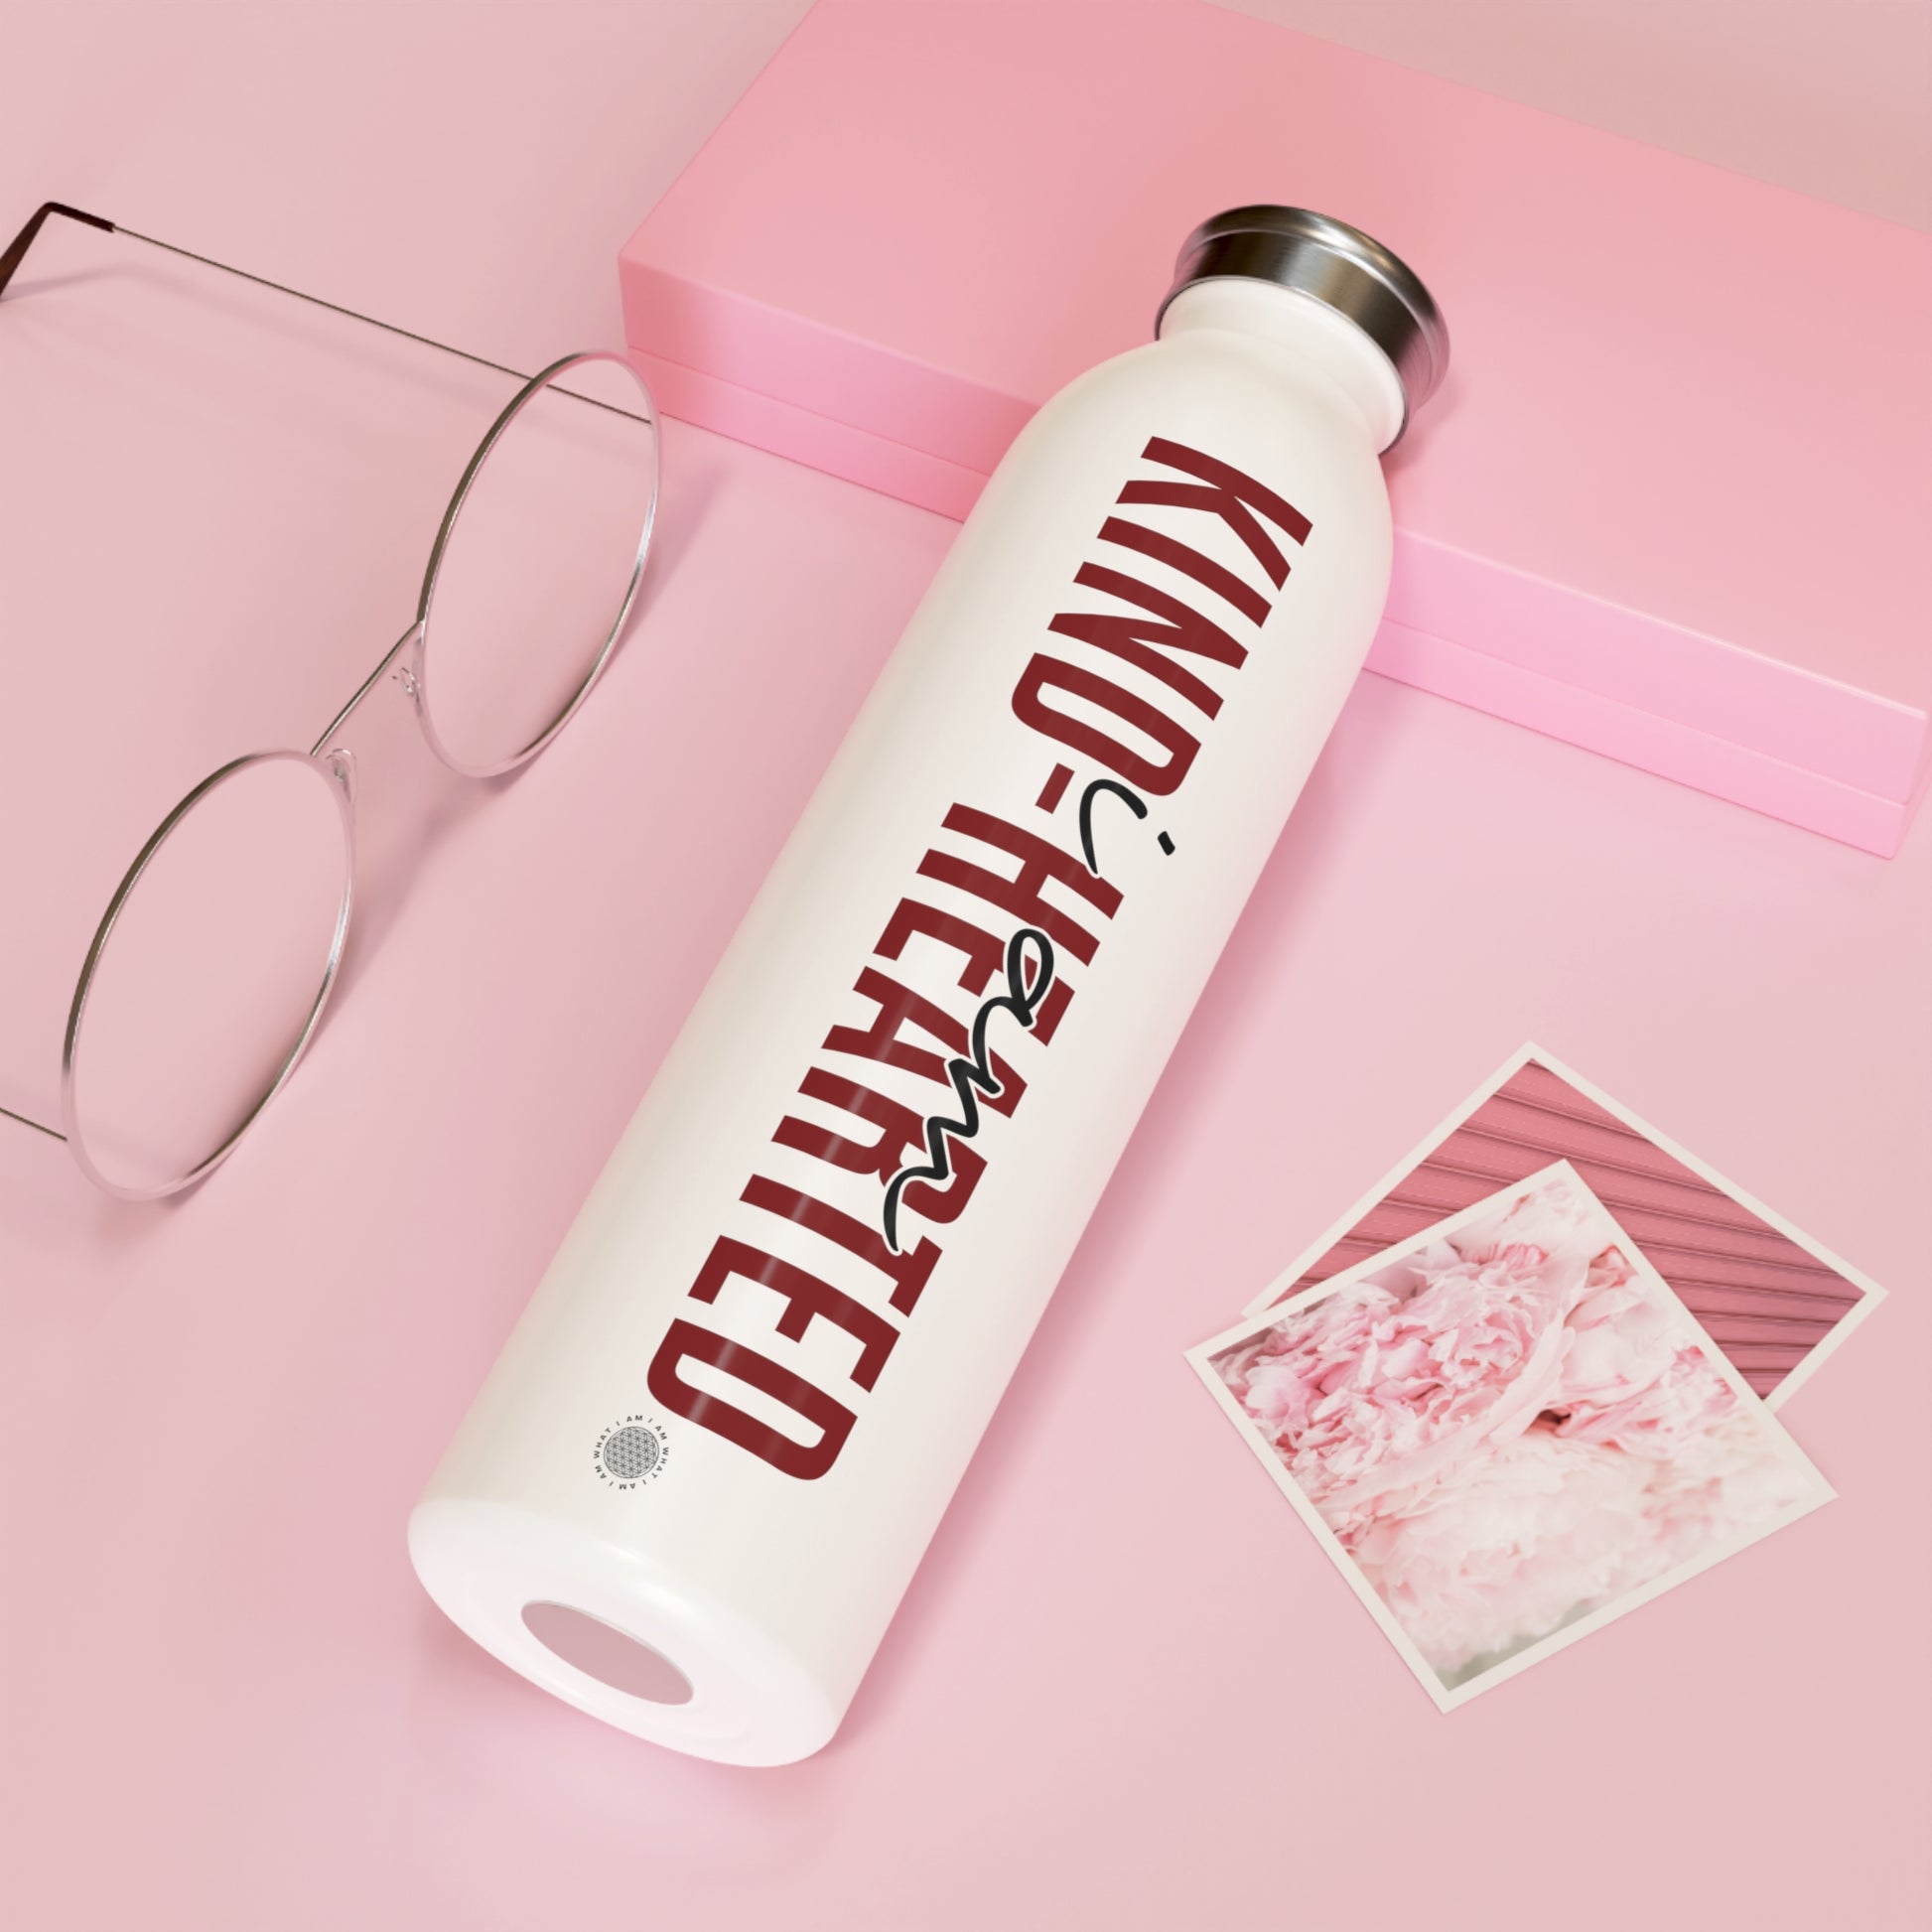 Our I Am Kind-Hearted affirmation water bottle is one of our positive affirmations for mental health. Positive thinking keeps our mindset happy and healthy. This personalized water bottle was designed to become a creator’s favorite canvas of expression.